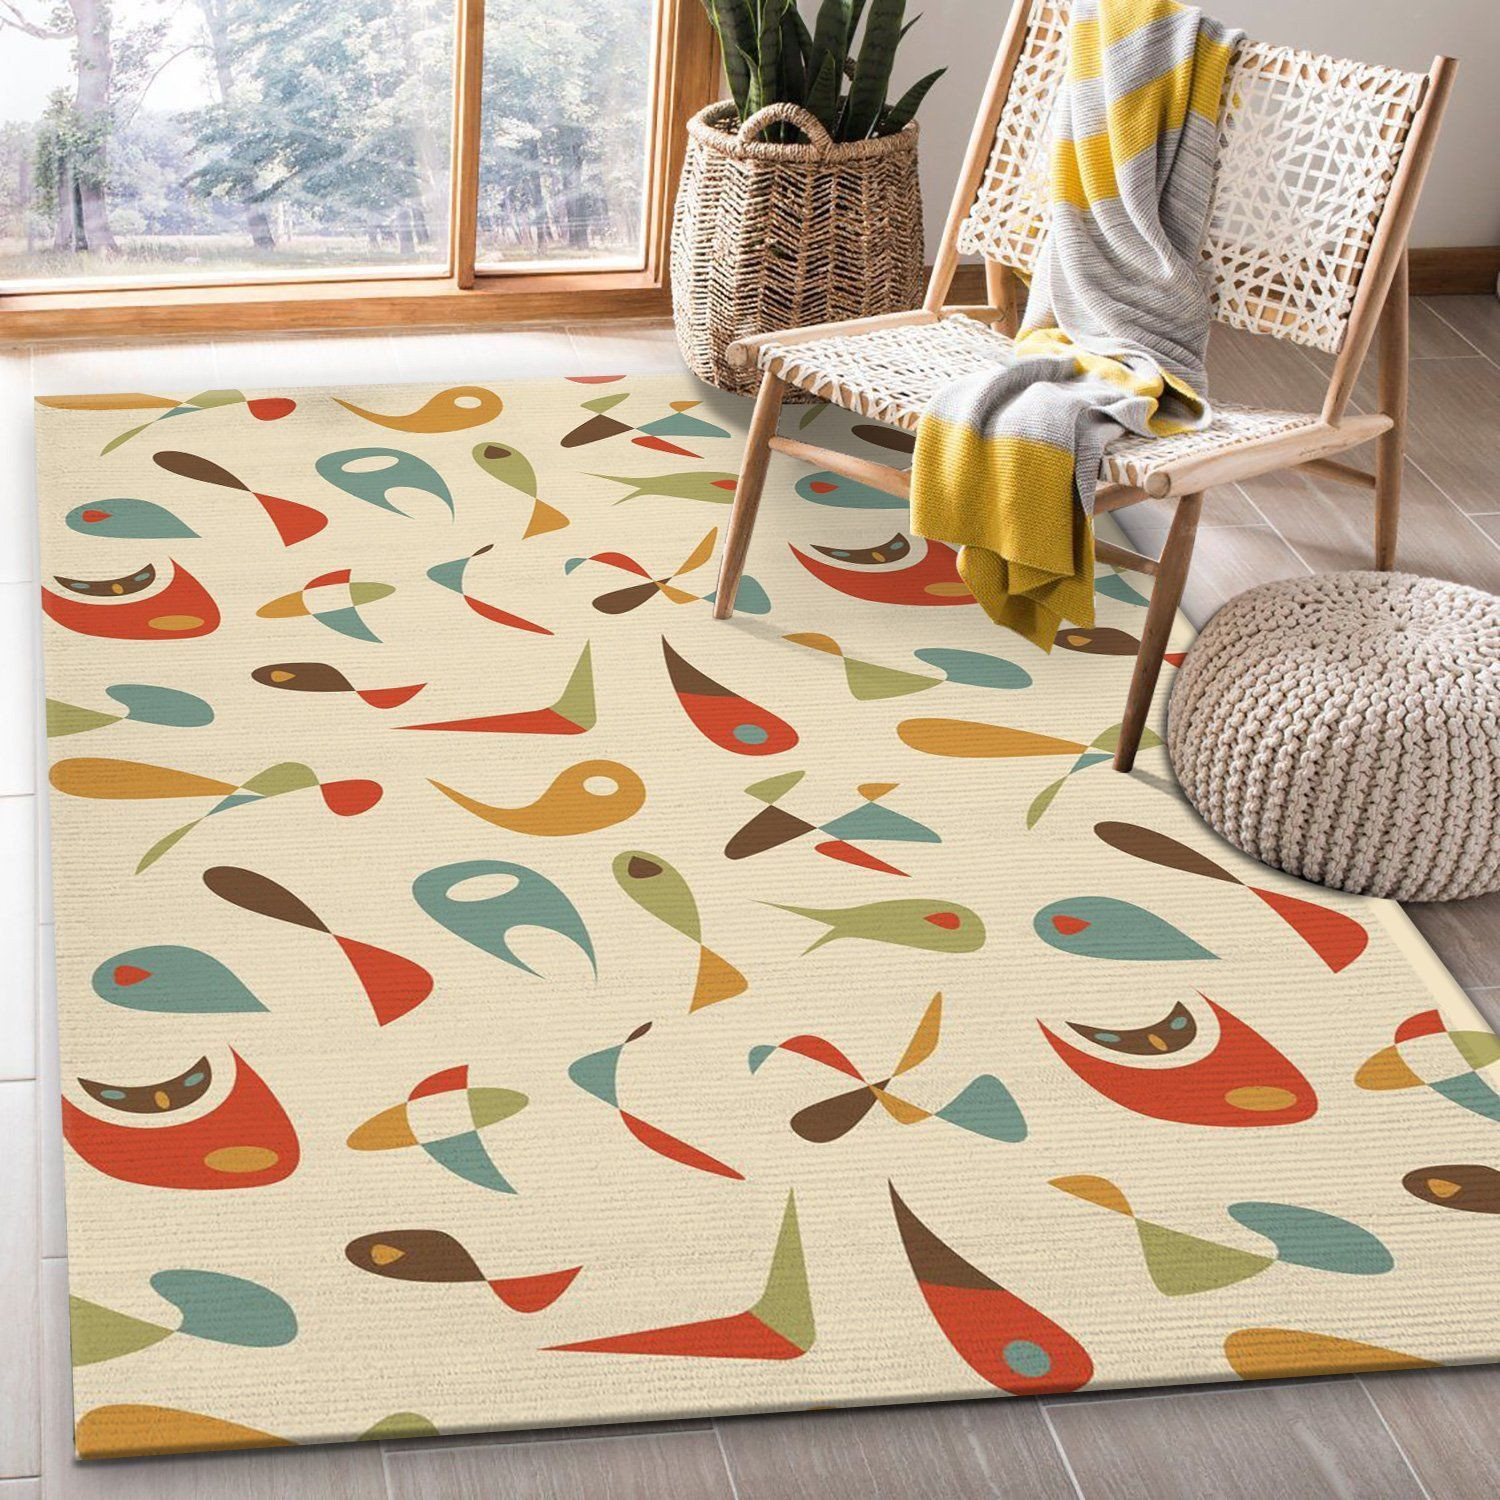 Midcentury Pattern 106 Area Rug, Living room and bedroom Rug, Christmas Gift US Decor - Indoor Outdoor Rugs